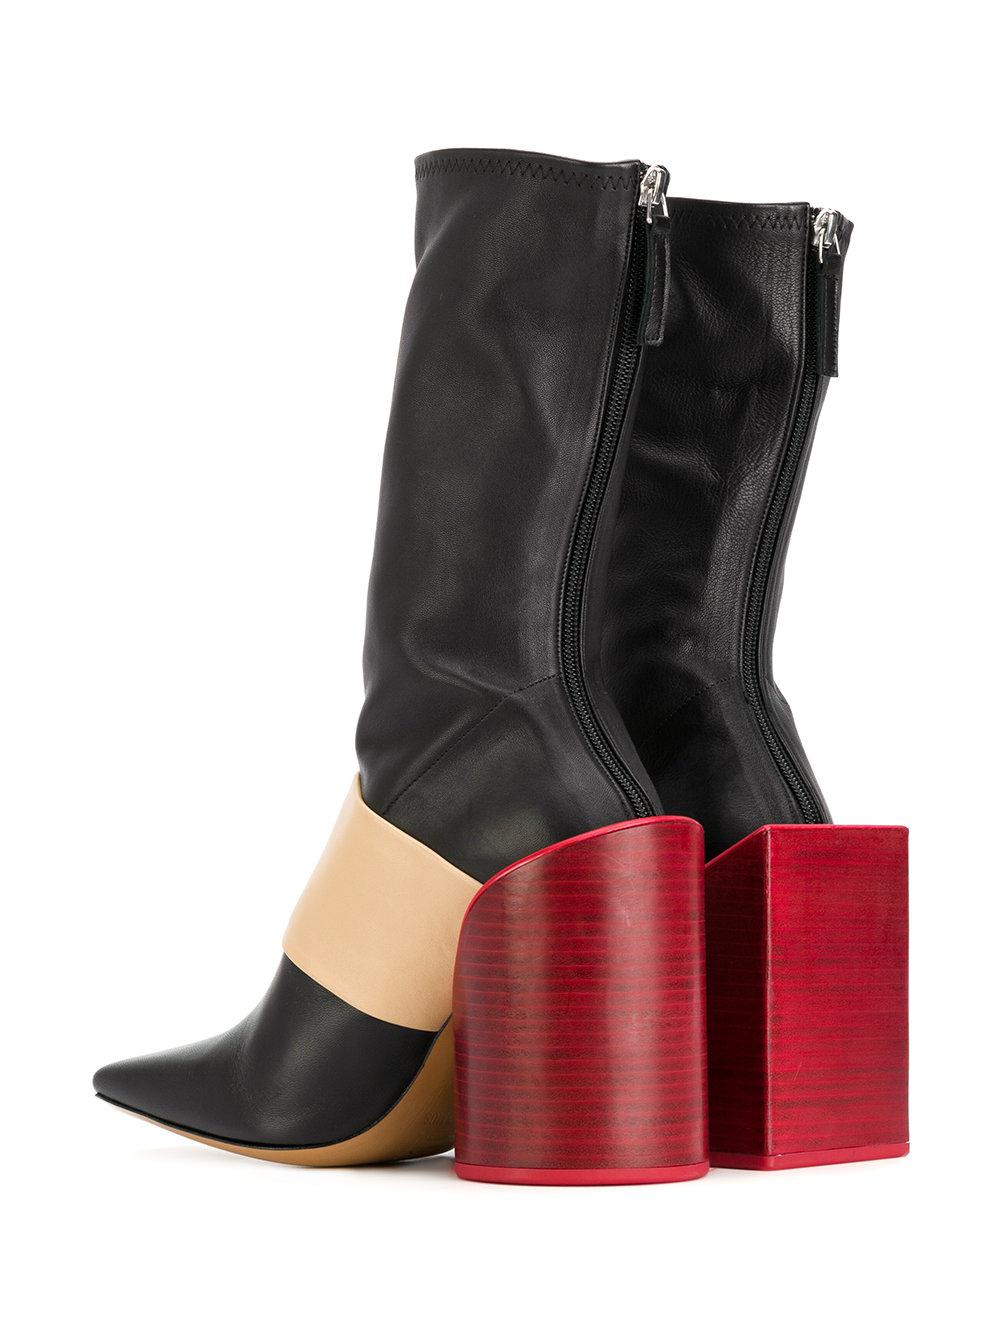 Jacquemus Button Boots in Black - Lyst